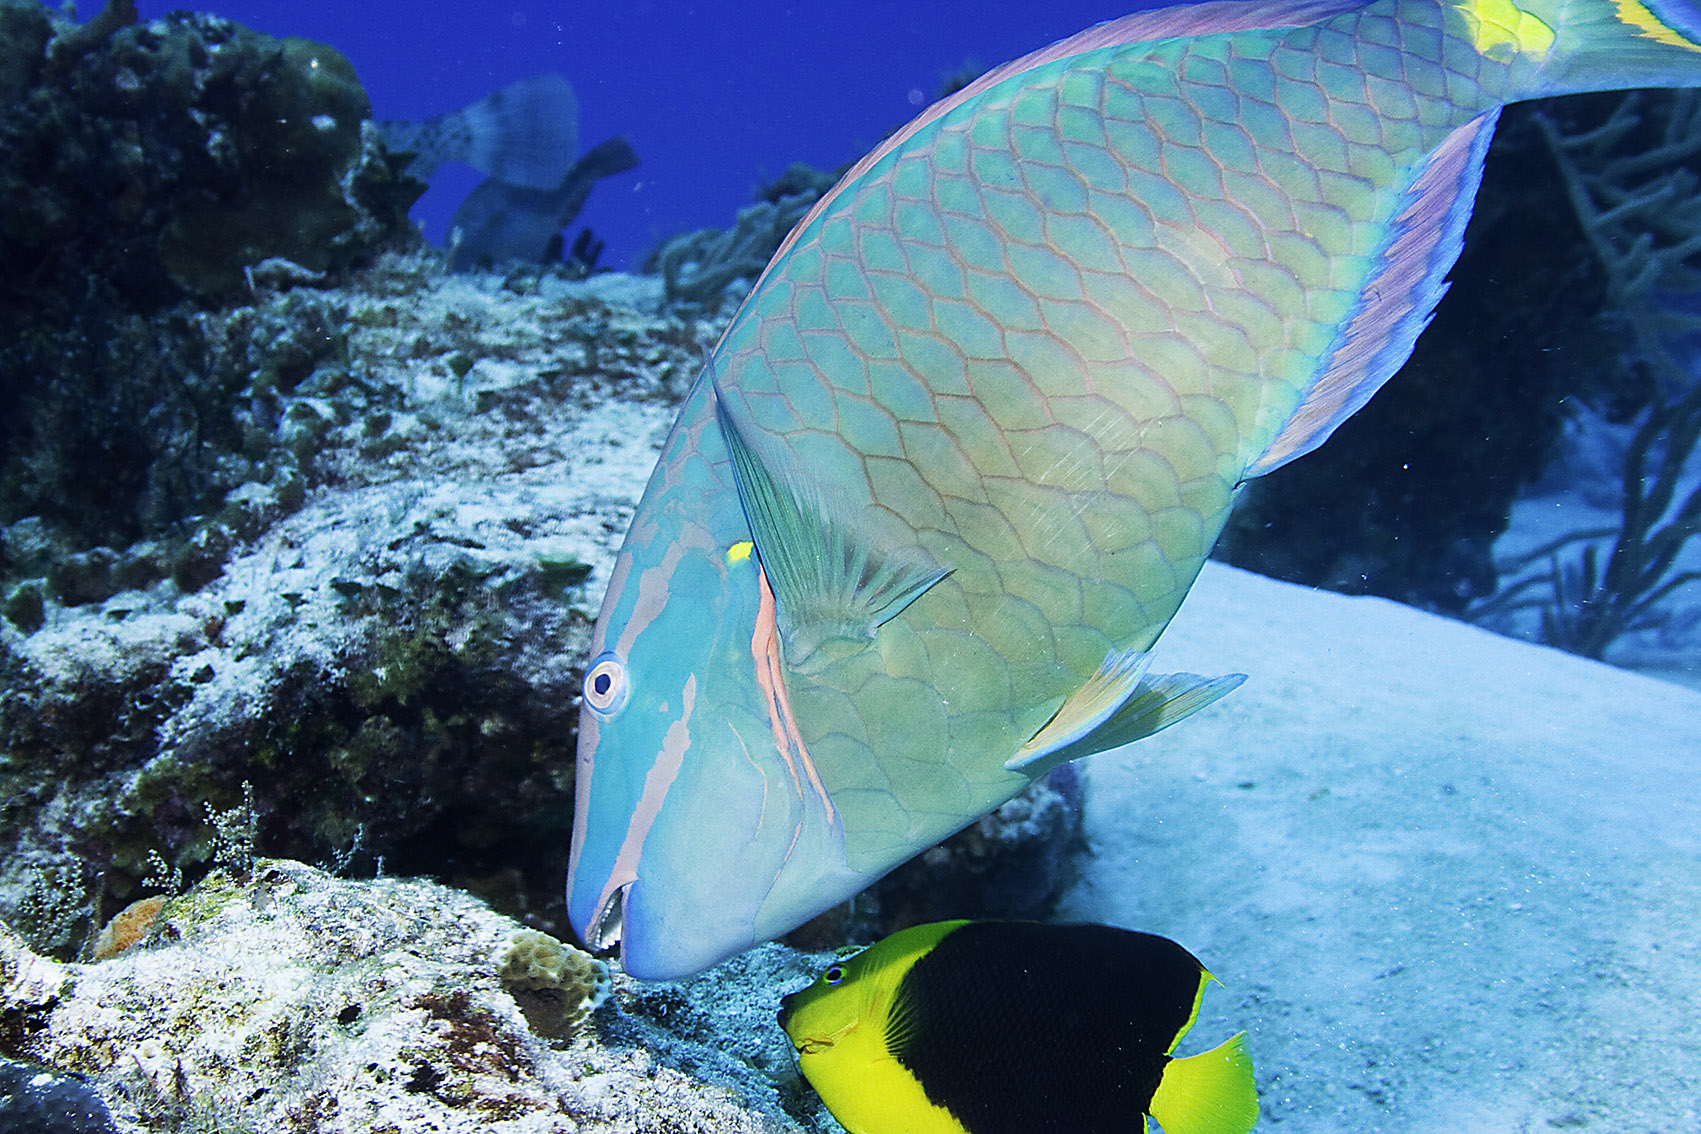 Parrot fish and friend